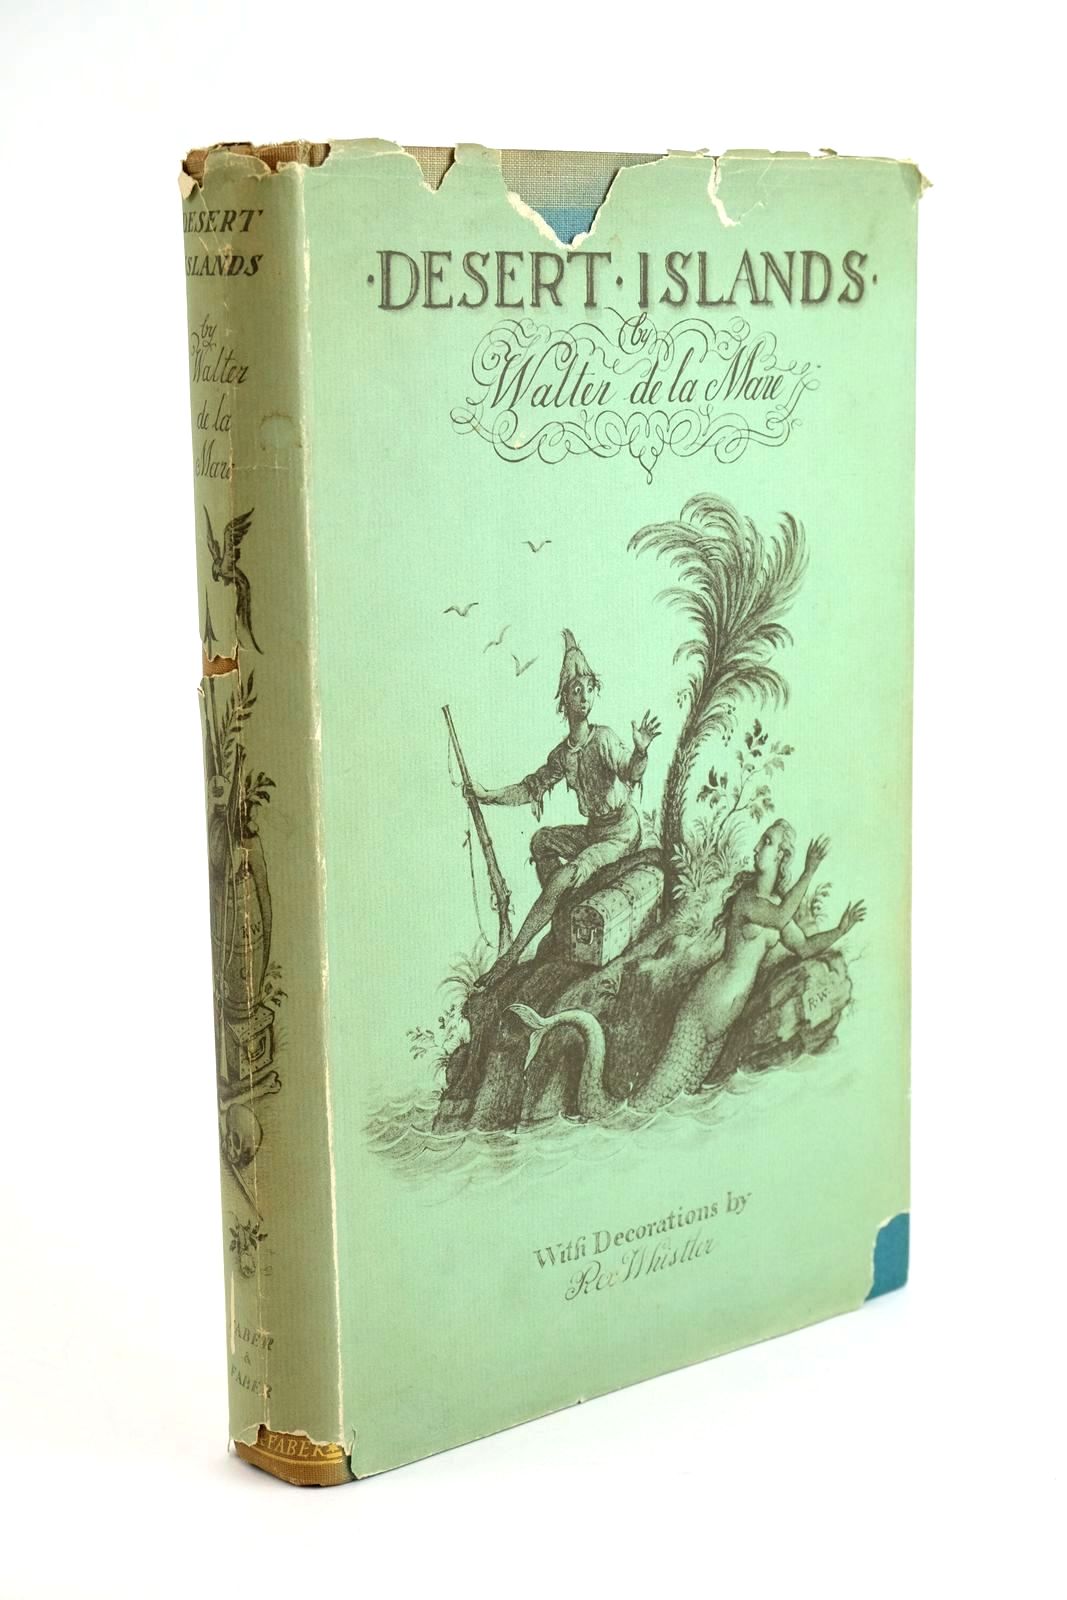 Photo of DESERT ISLANDS AND ROBINSON CRUSOE written by De La Mare, Walter illustrated by Whistler, Rex published by Faber & Faber (STOCK CODE: 1323483)  for sale by Stella & Rose's Books